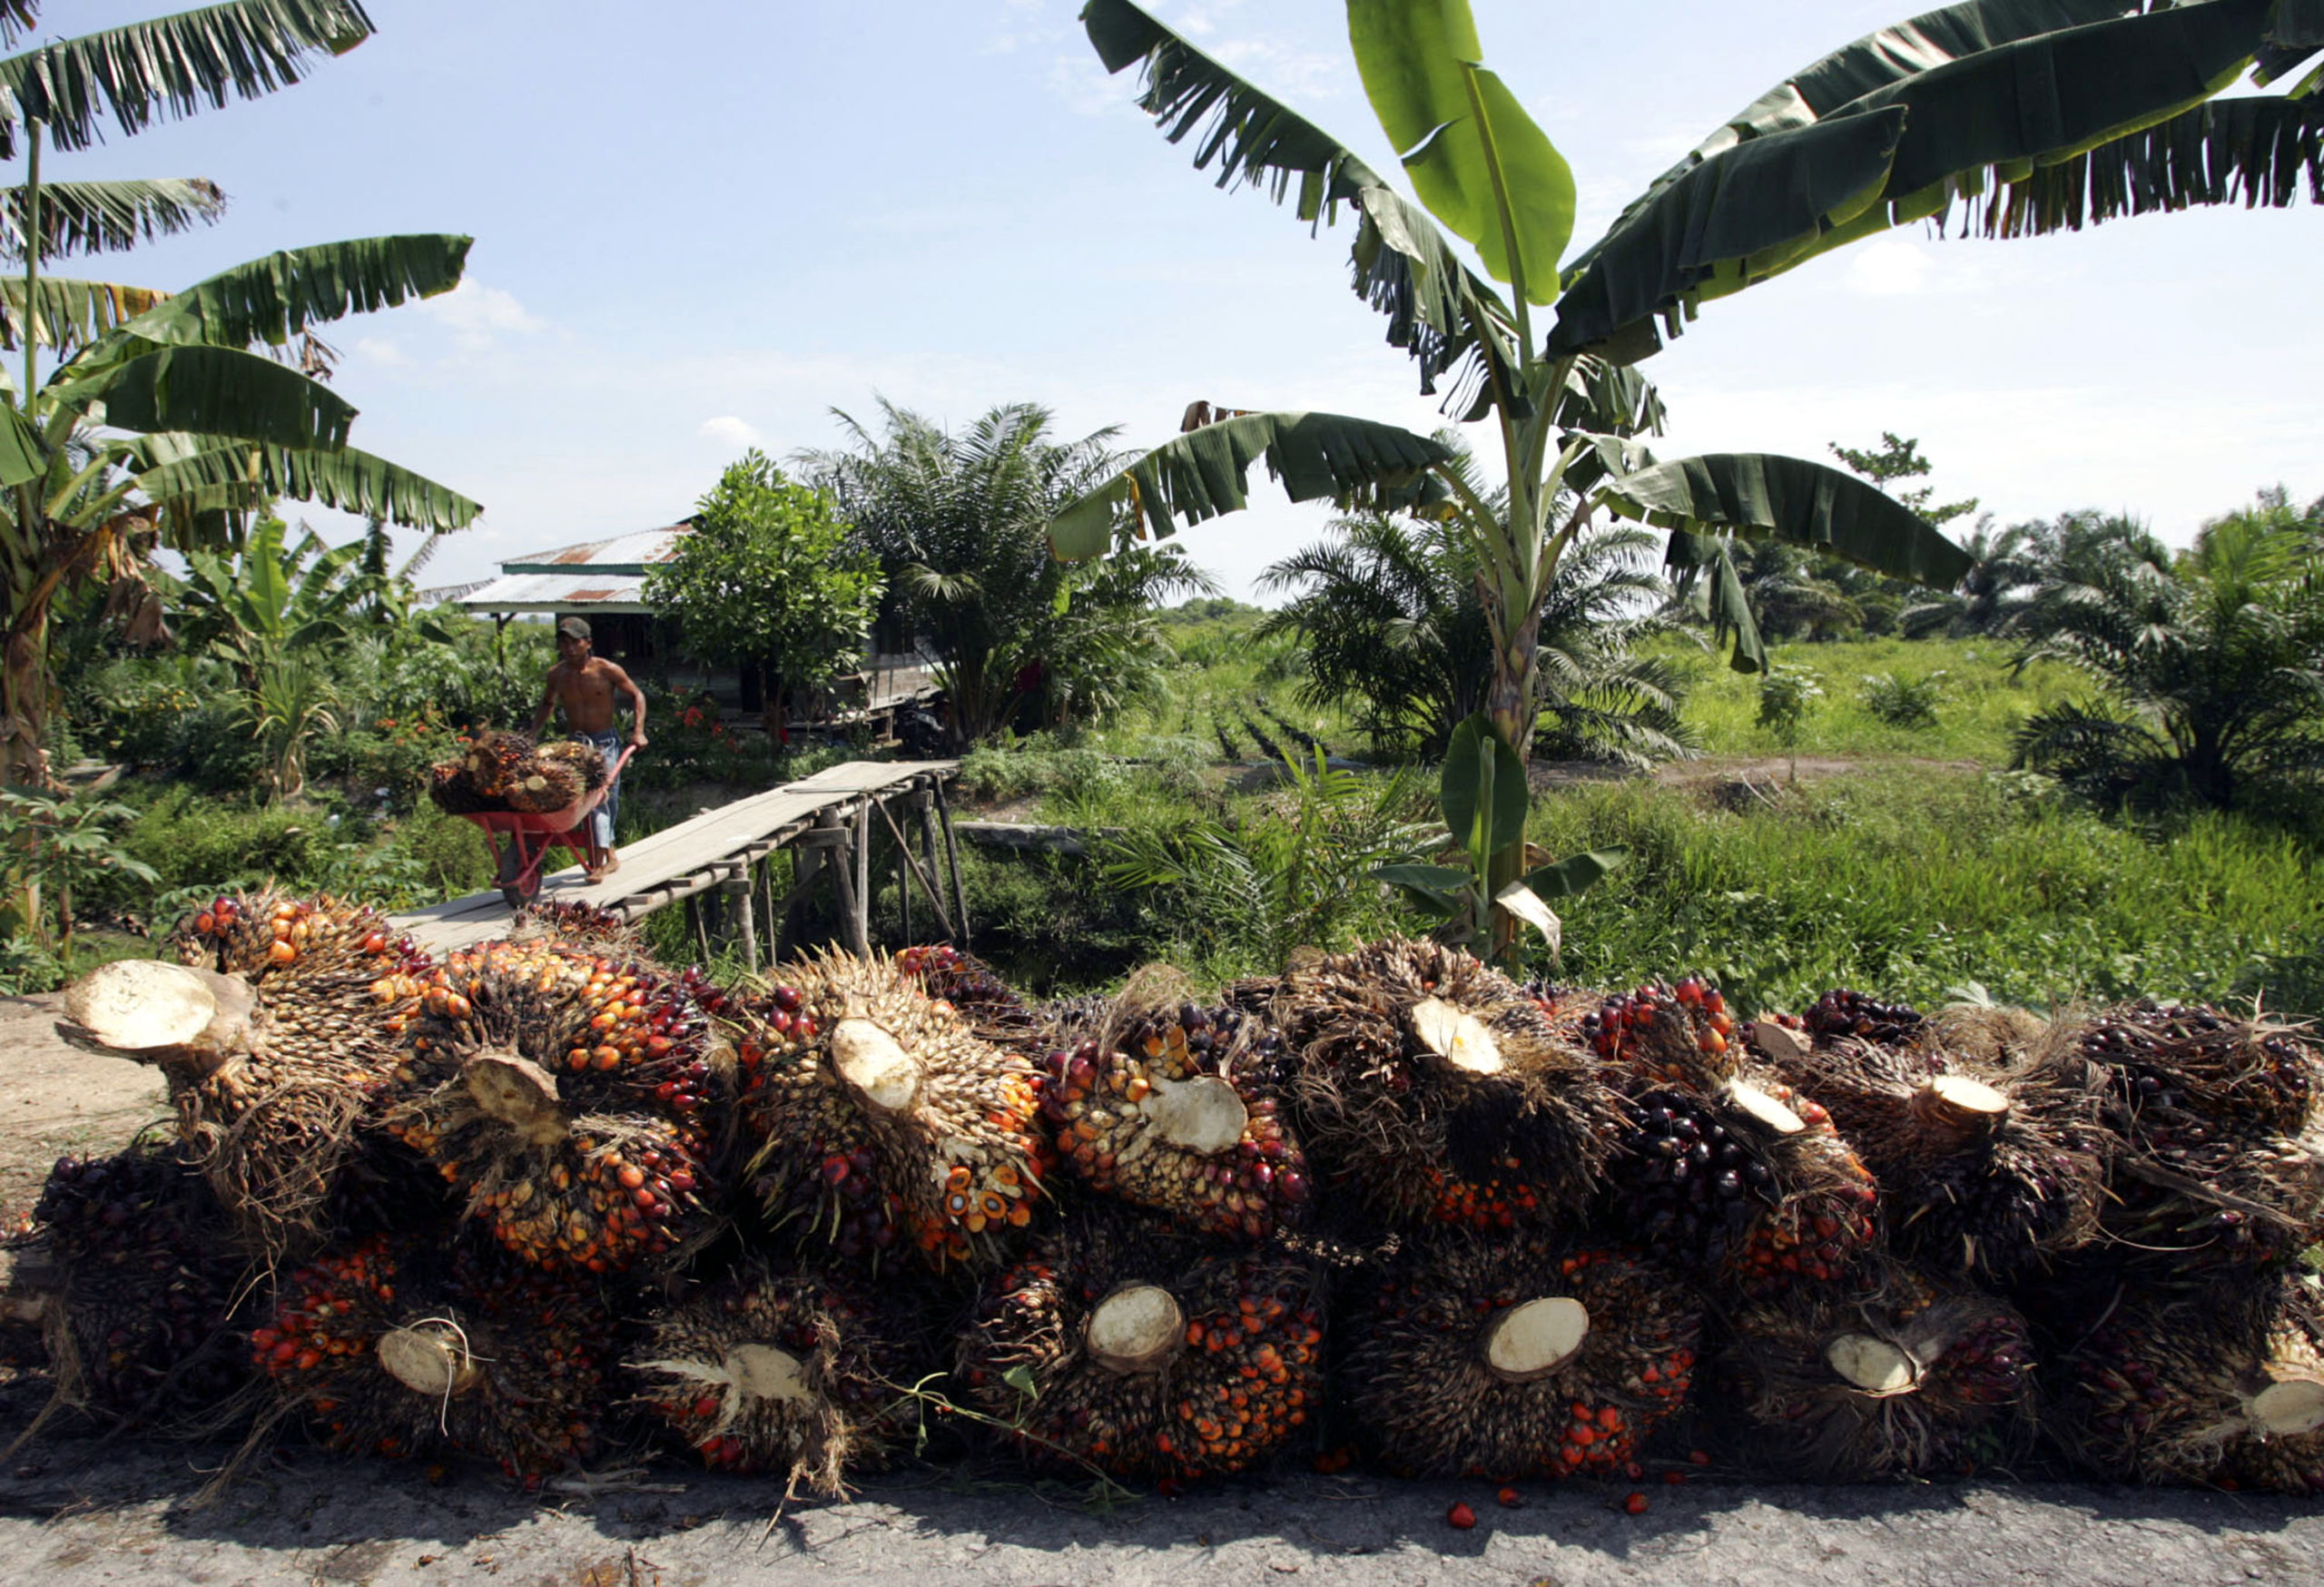 Seeds of palm oil are harvested at a plantation in Indonesia. (Dimas Ardian/Getty Images)